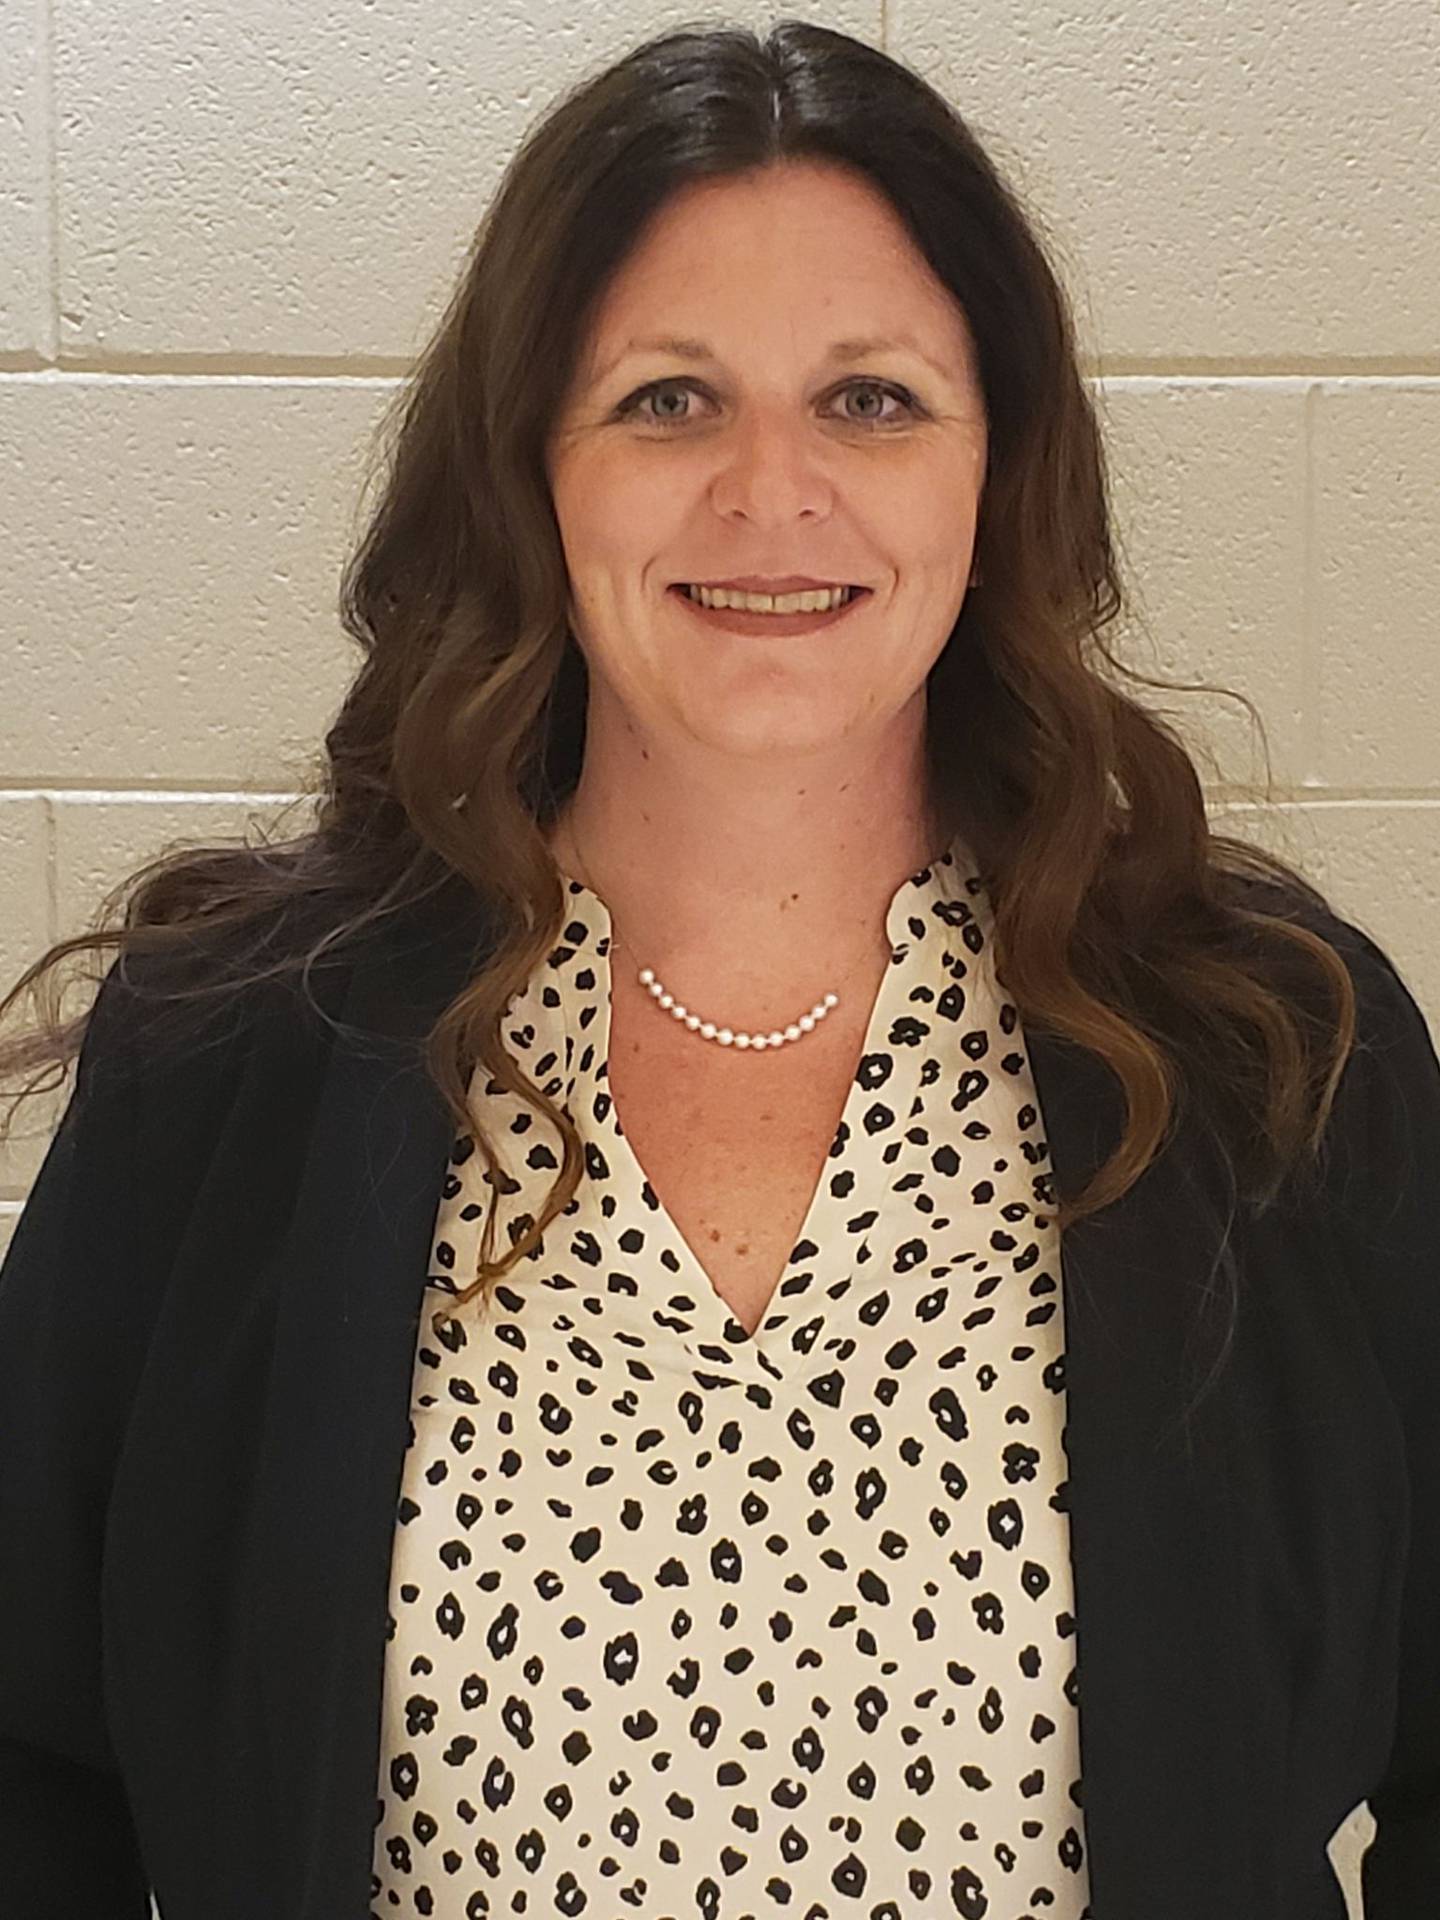 Julie Anderson, special education administrator for District 202 in Plainfield, will serve as the new director for elementary student services.